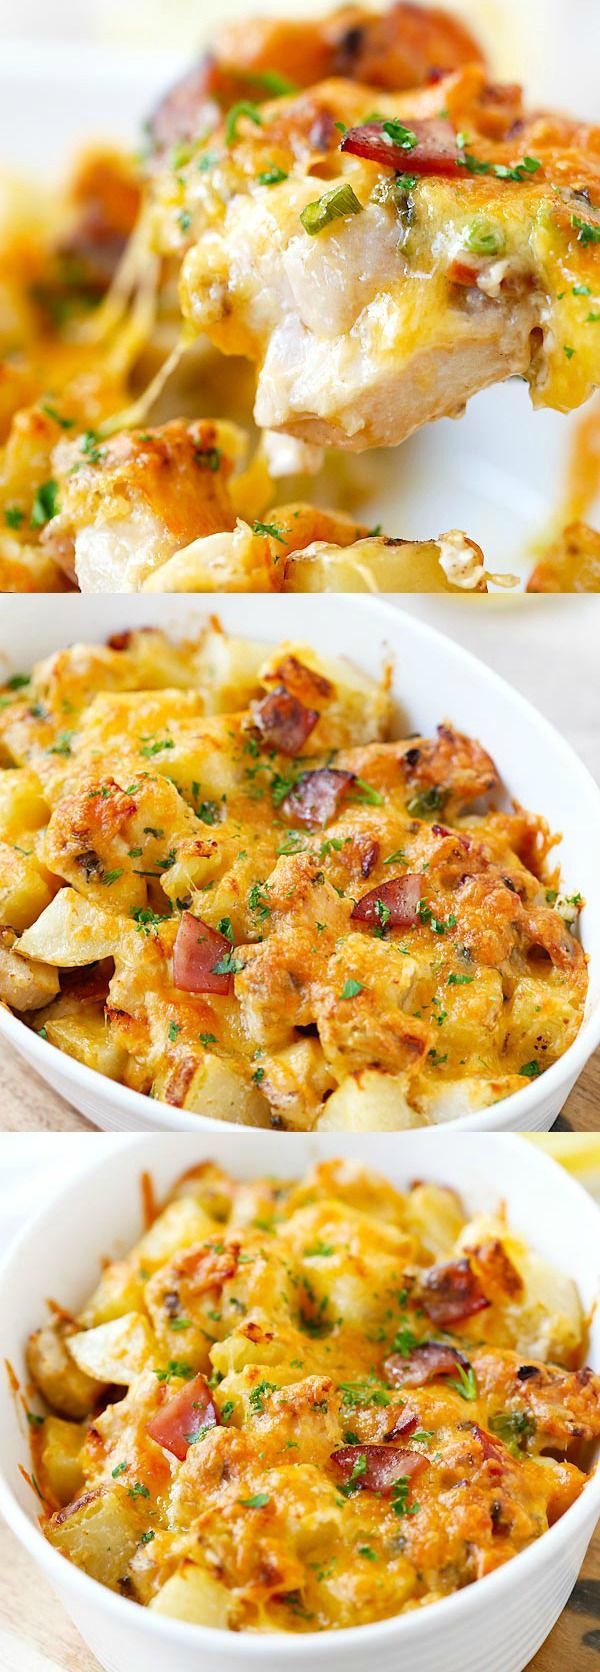 Baked Chicken and Potato Casserole – crazy delicious chicken potato casserole loaded with cheddar cheese, bacon and cream, easy